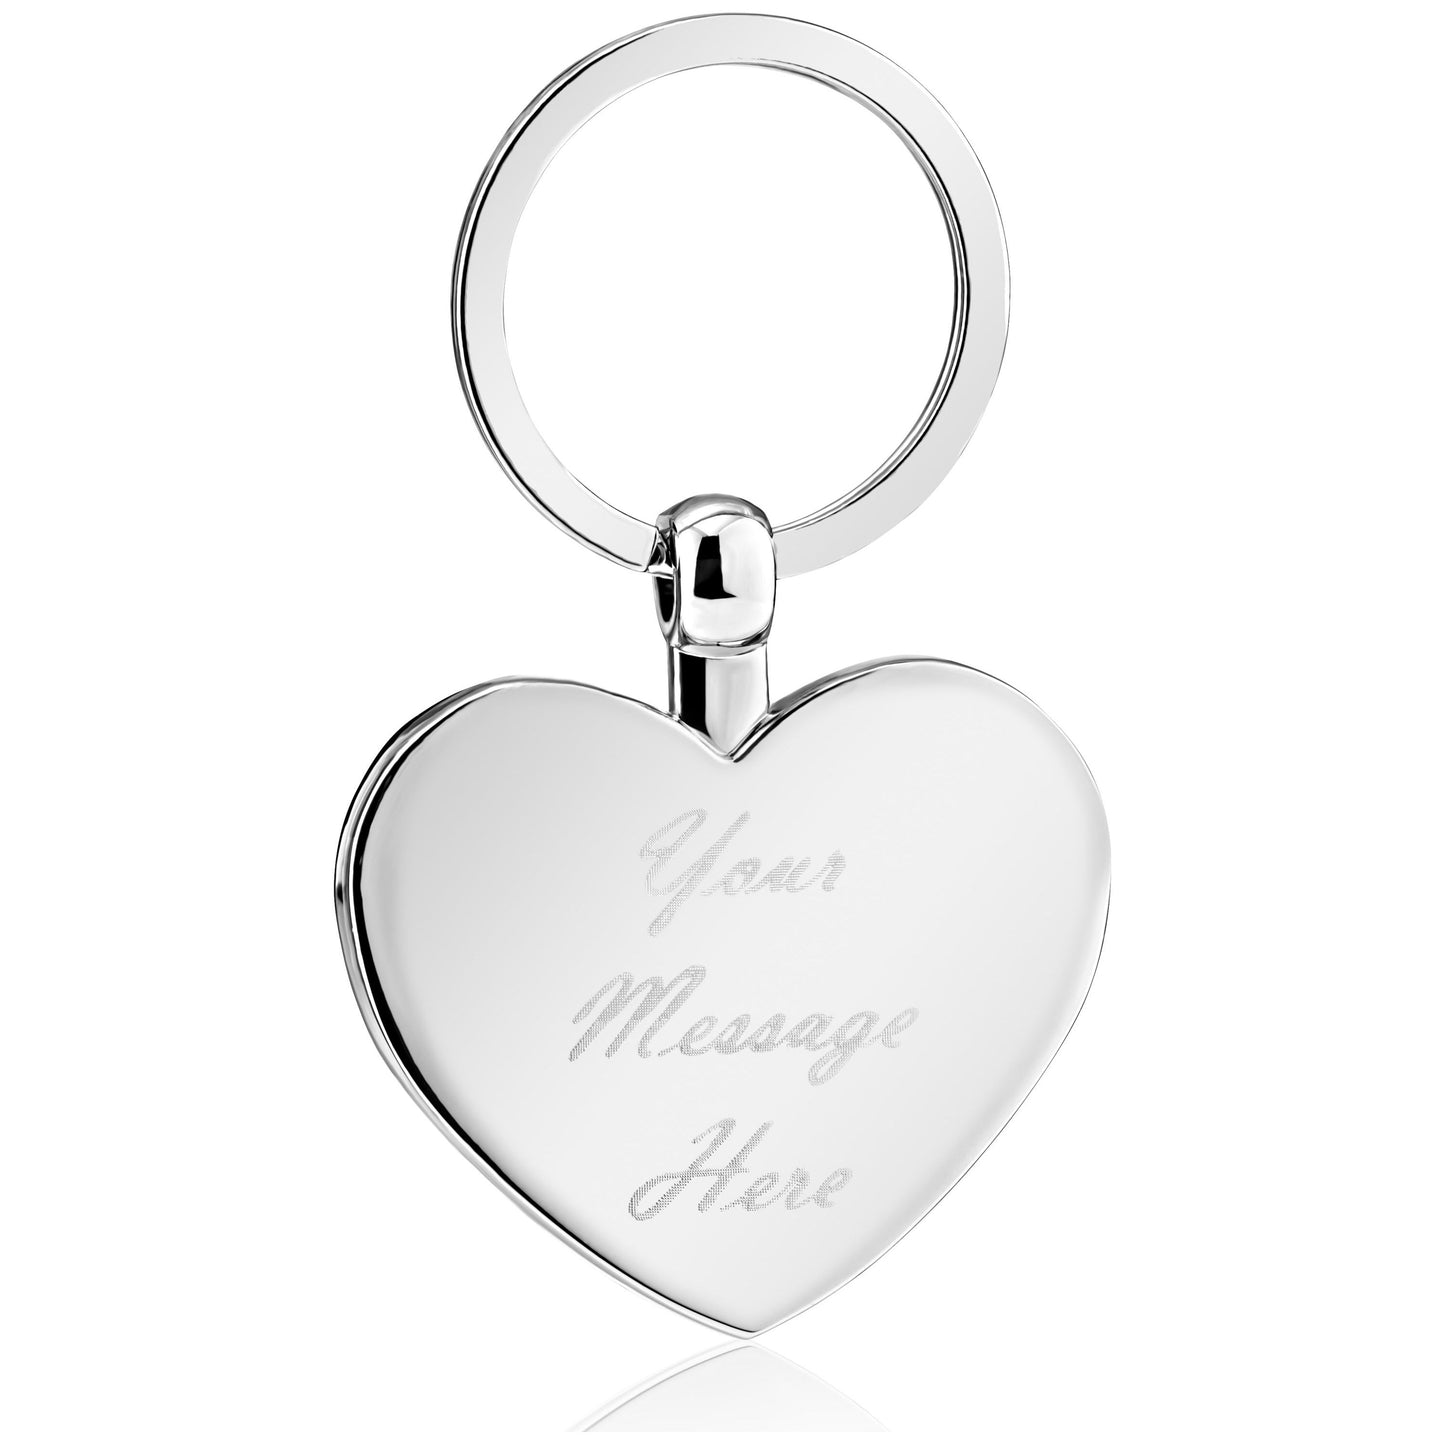 Personalised Silver Heart Shaped Keyring - Ashton and Finch